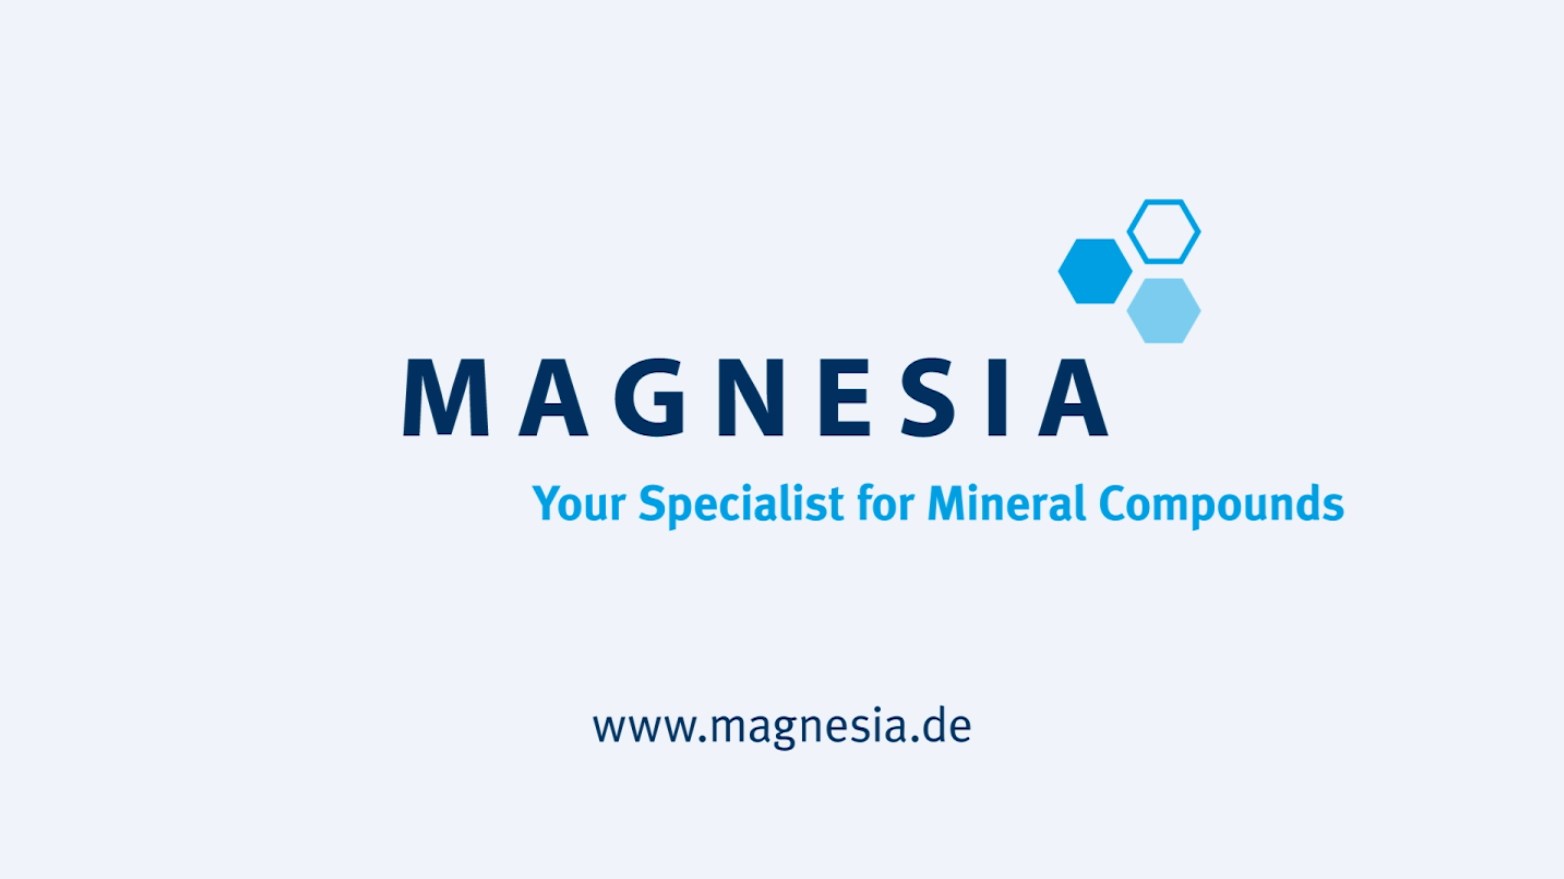 MAGNESIA Business Model in 100 seconds